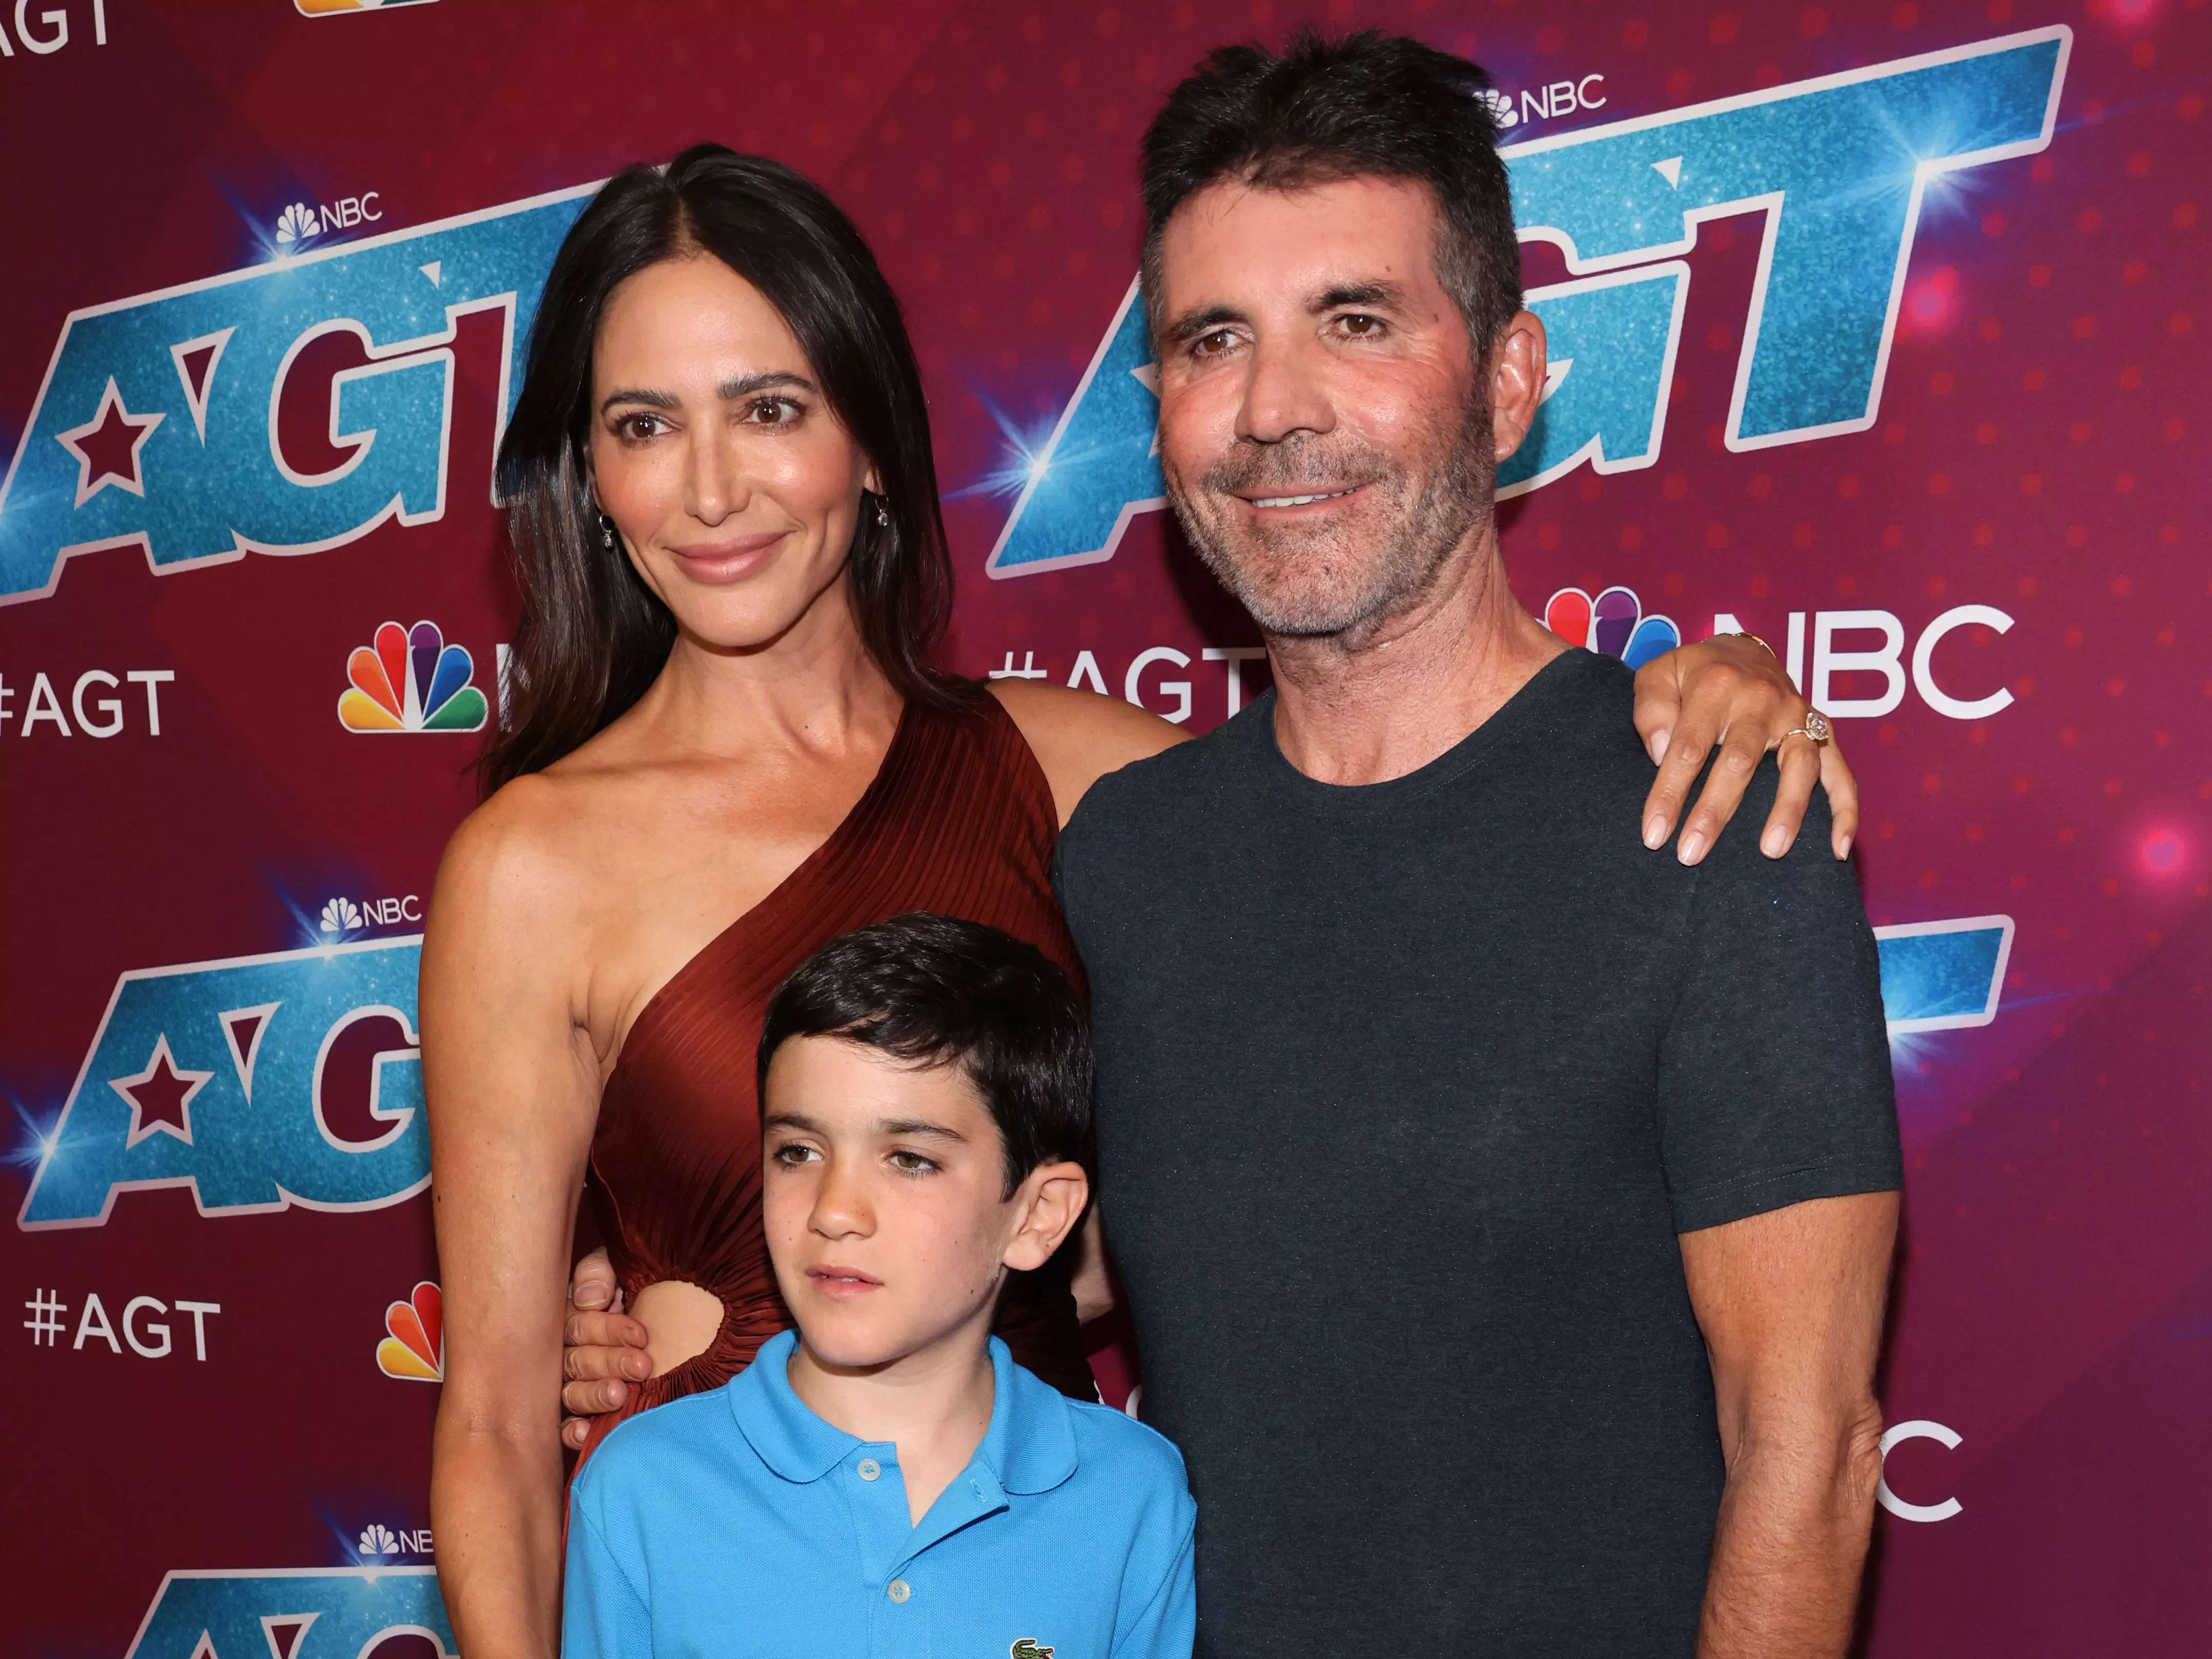 Simon Cowell Sold His 6 Bedroom London Mansion For 19 Million Amid 